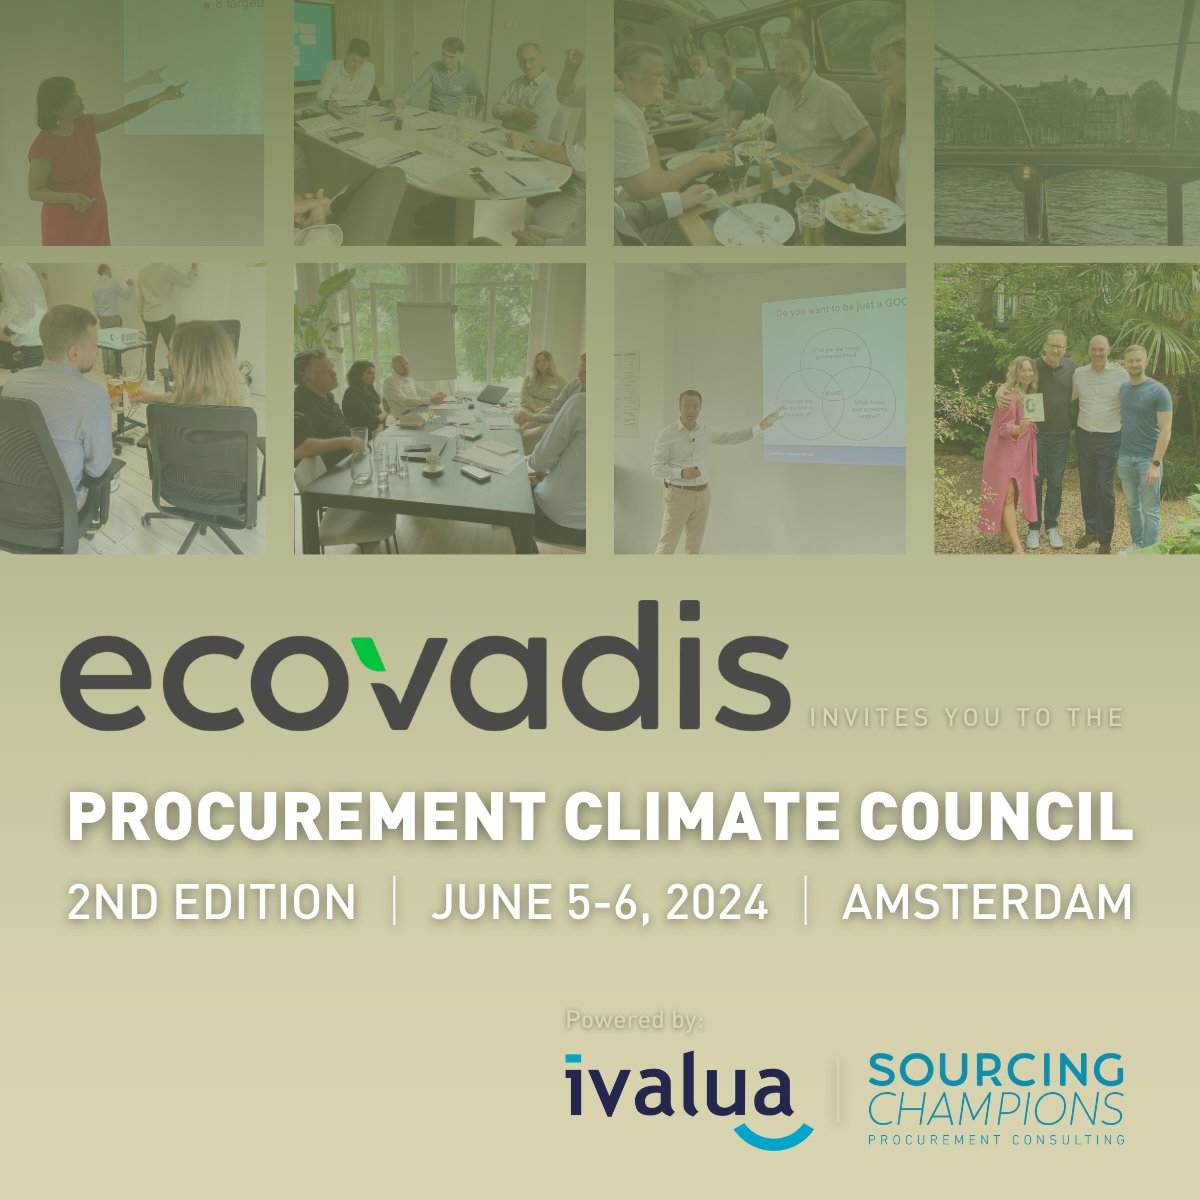 Join EcoVadis at the Procurement Climate Council in Amsterdam on June 5-6. Our colleague Senne Vanderstraeten will be on-site to provide insights on sustainability in procurement and meet with you in an exclusive atmosphere. Register now 👉 ow.ly/V0TM50RyFL8